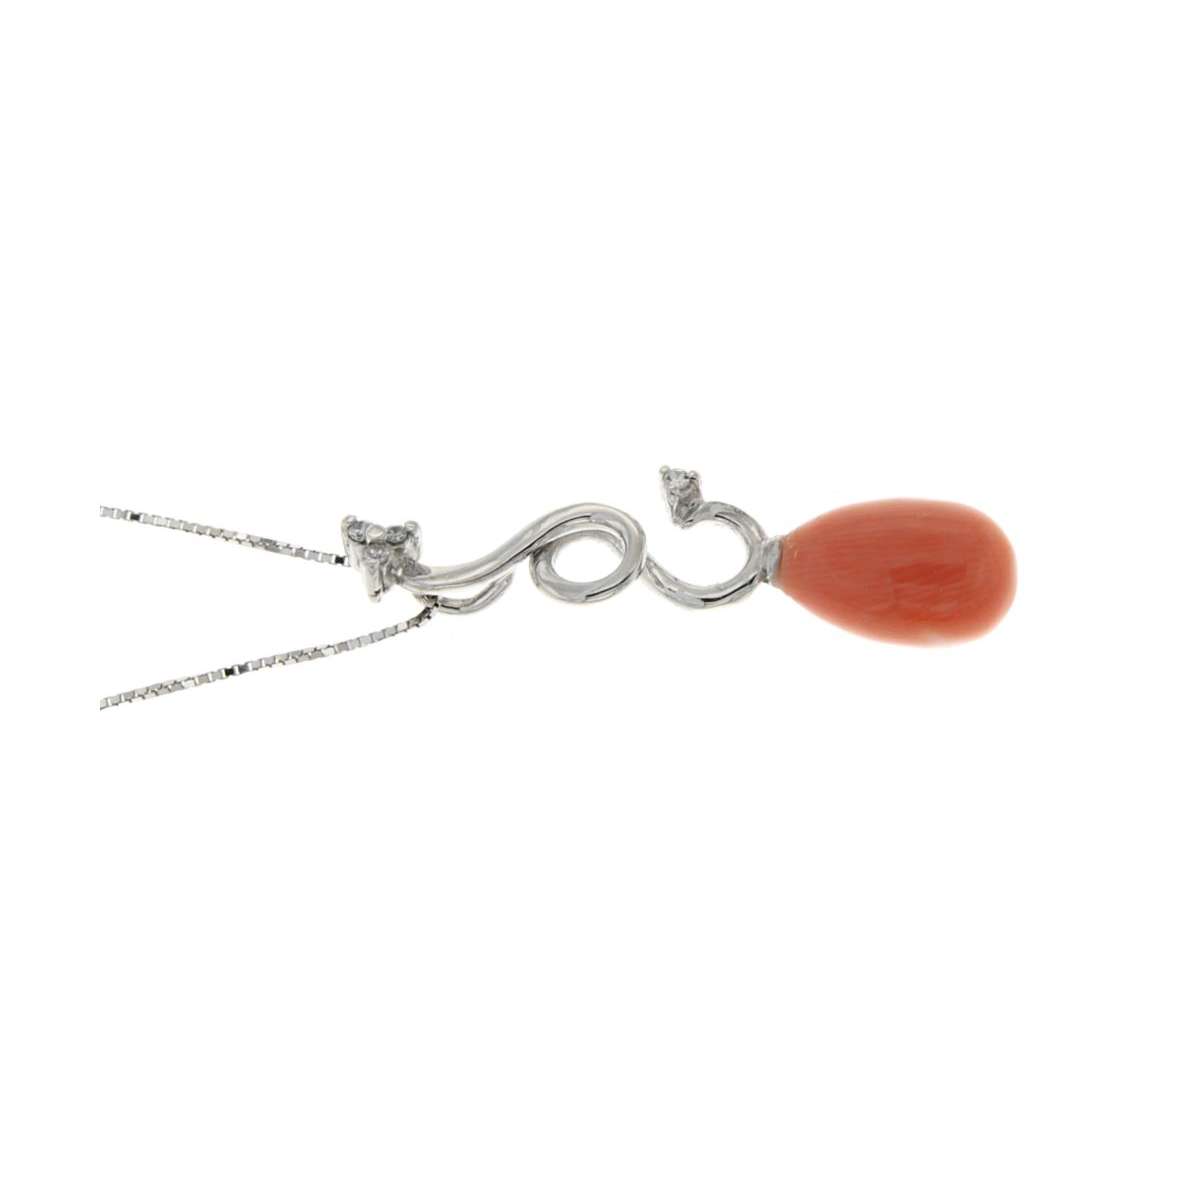 Necklace with twist pendant pink coral drop 5.16 cts. 0.04 carats diamond G-VS1